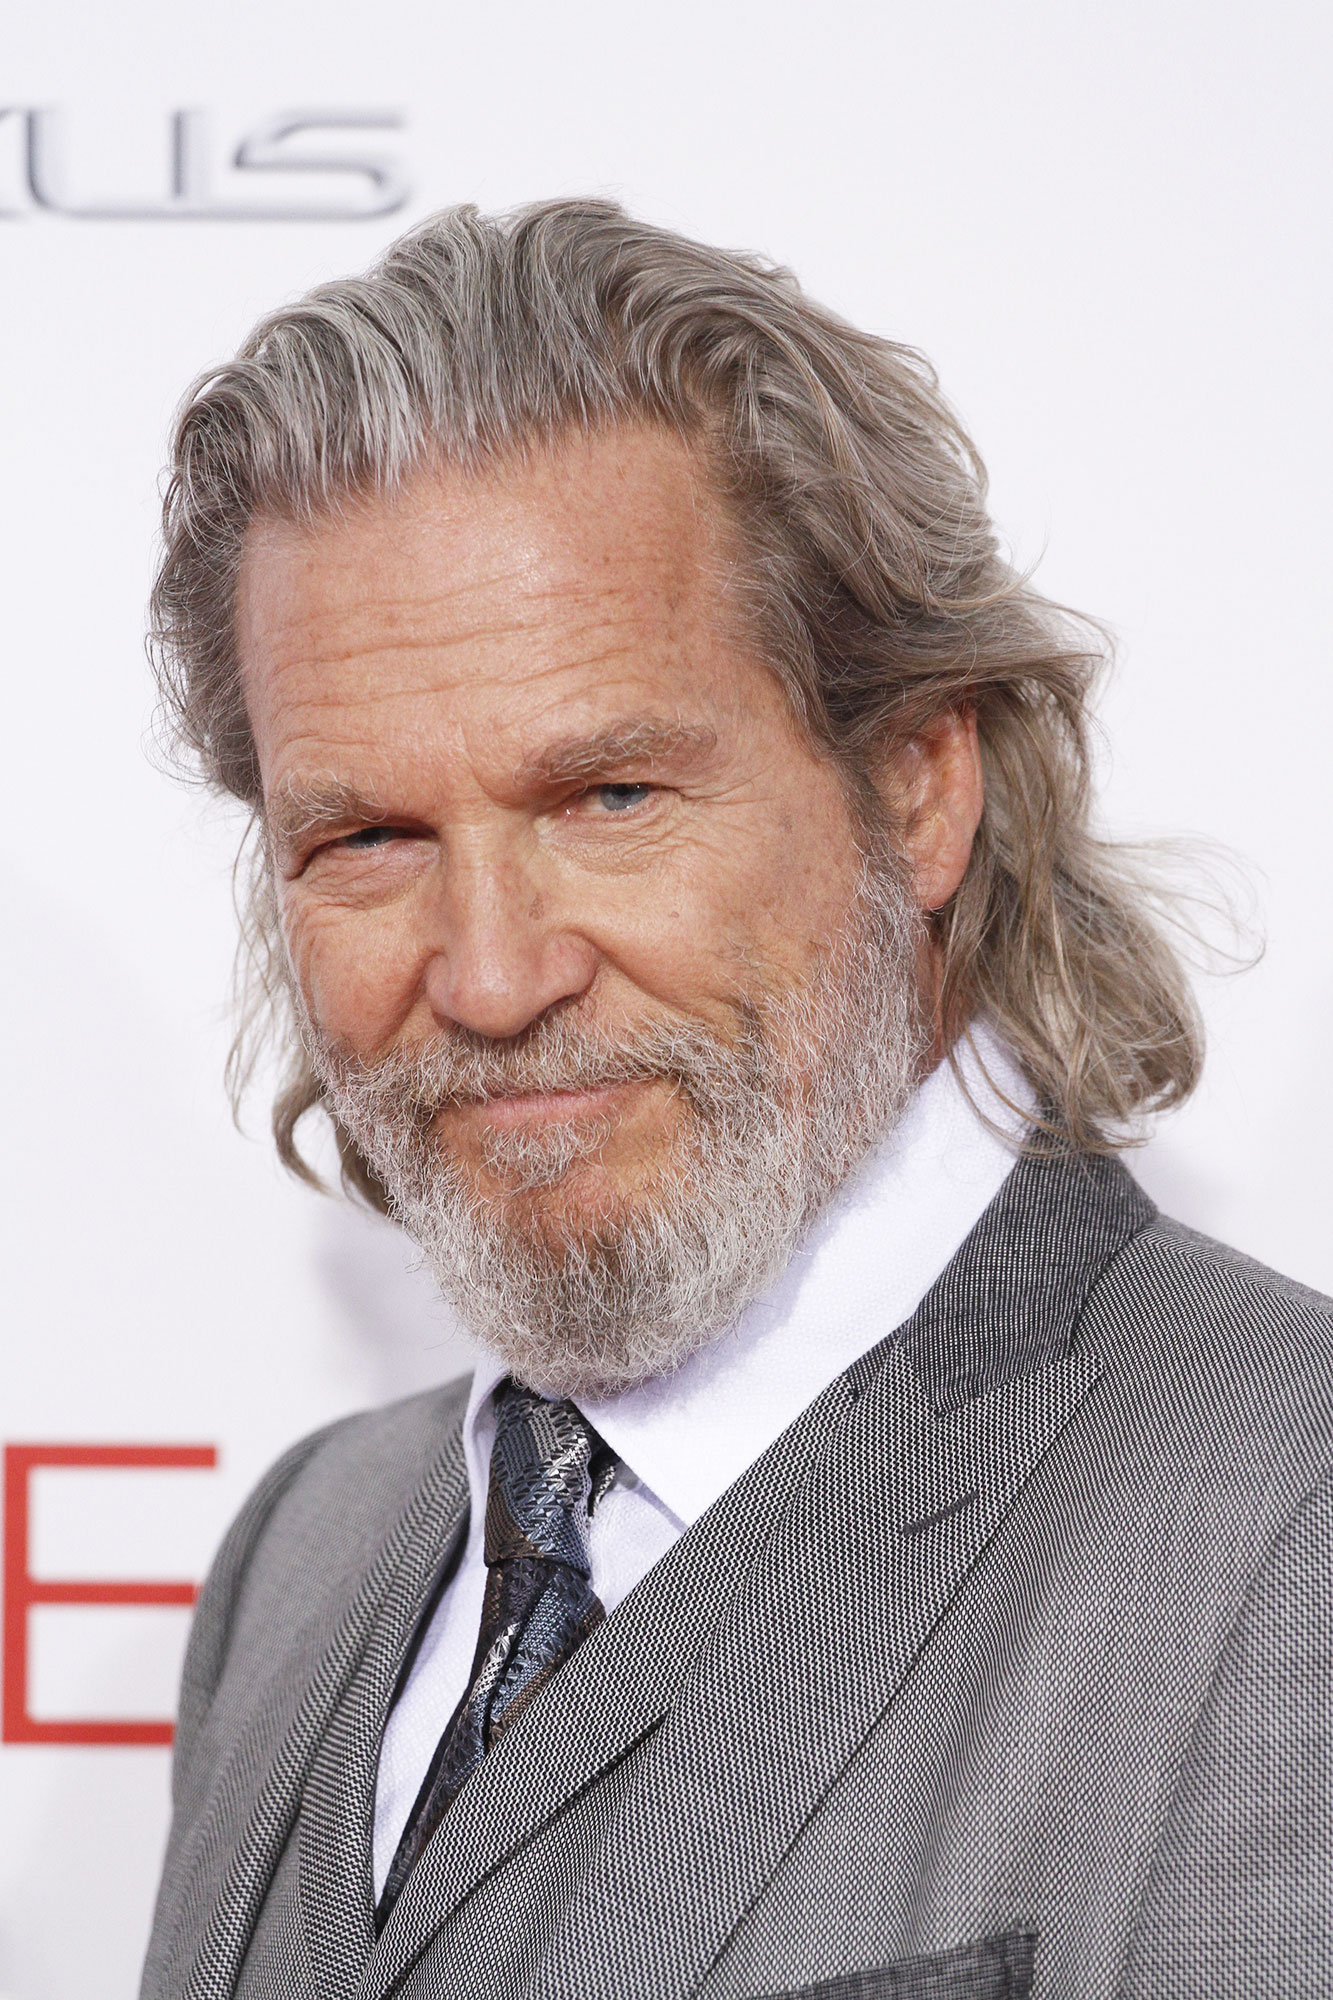 Jeff Bridges Throws First Pitch at Dodgers Game Big Lebowski-Style image